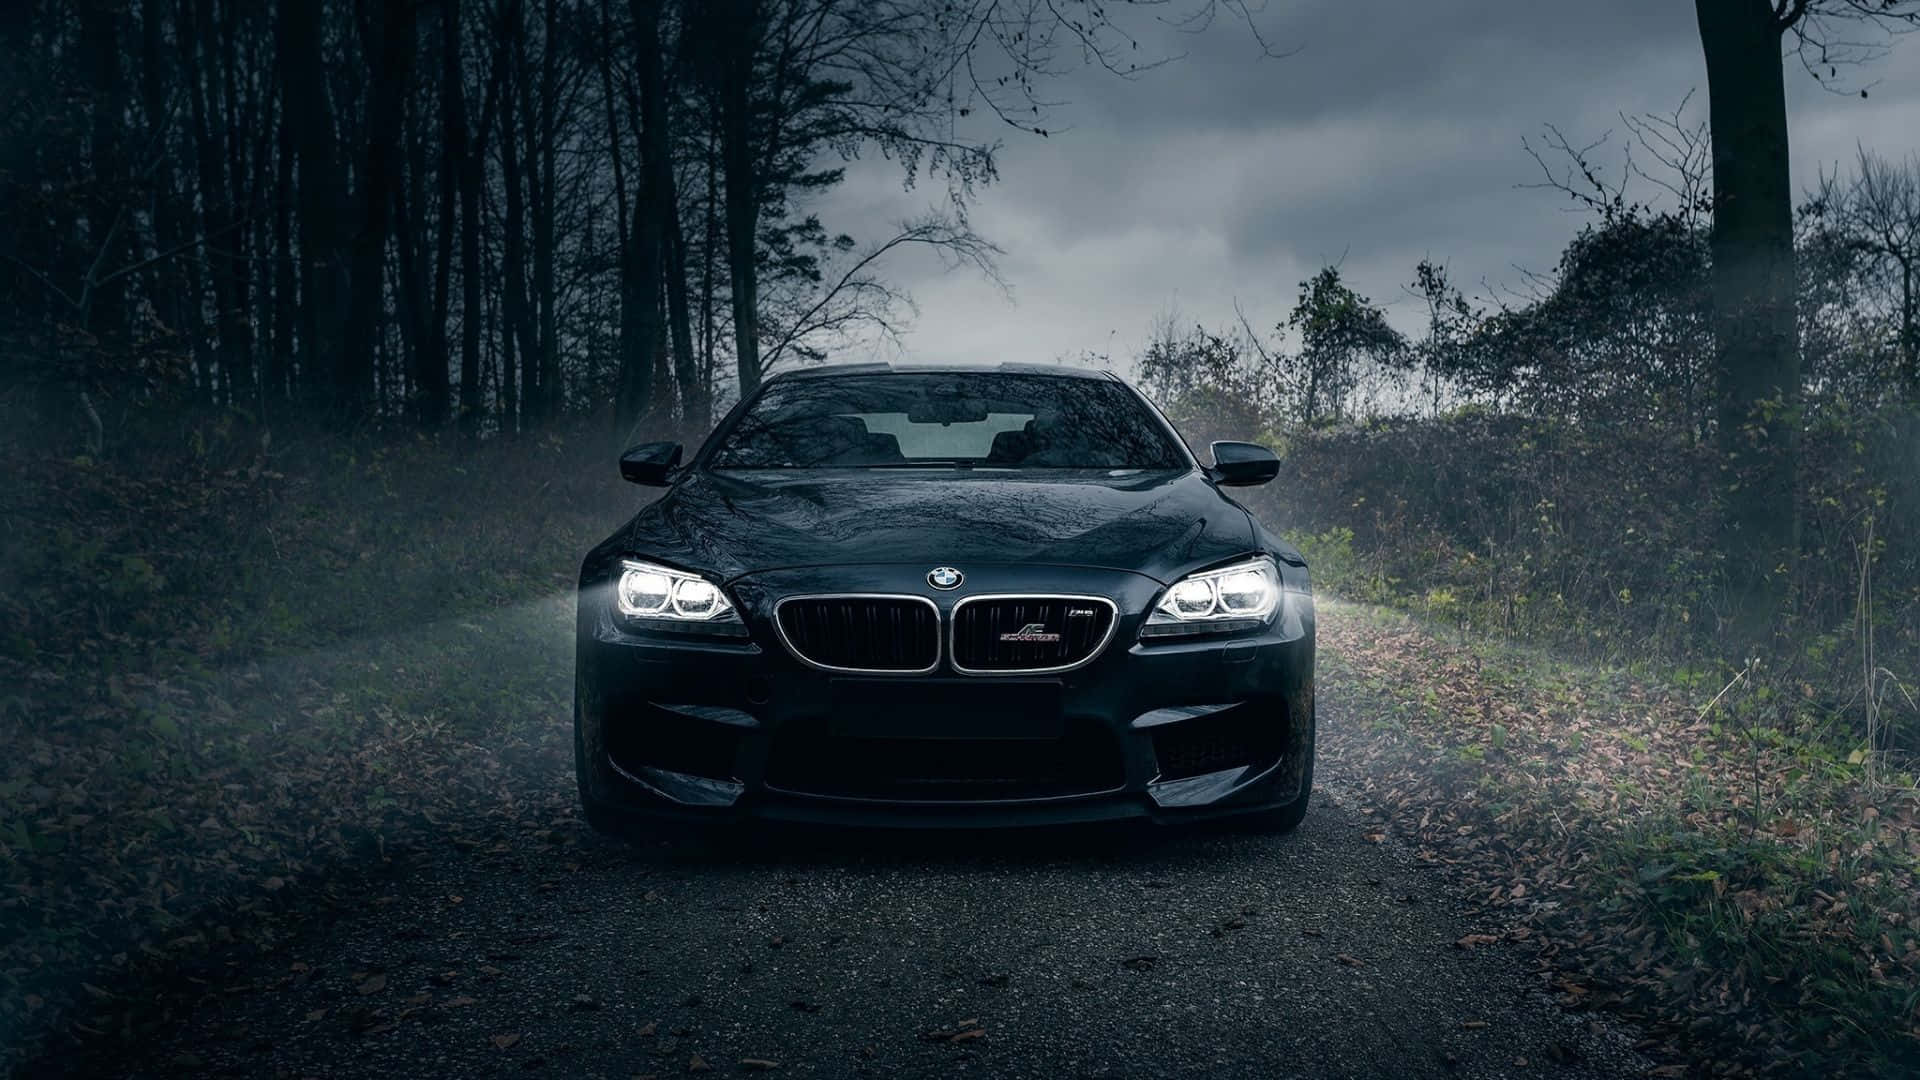 Download Cool BMW In Forest Wallpaper